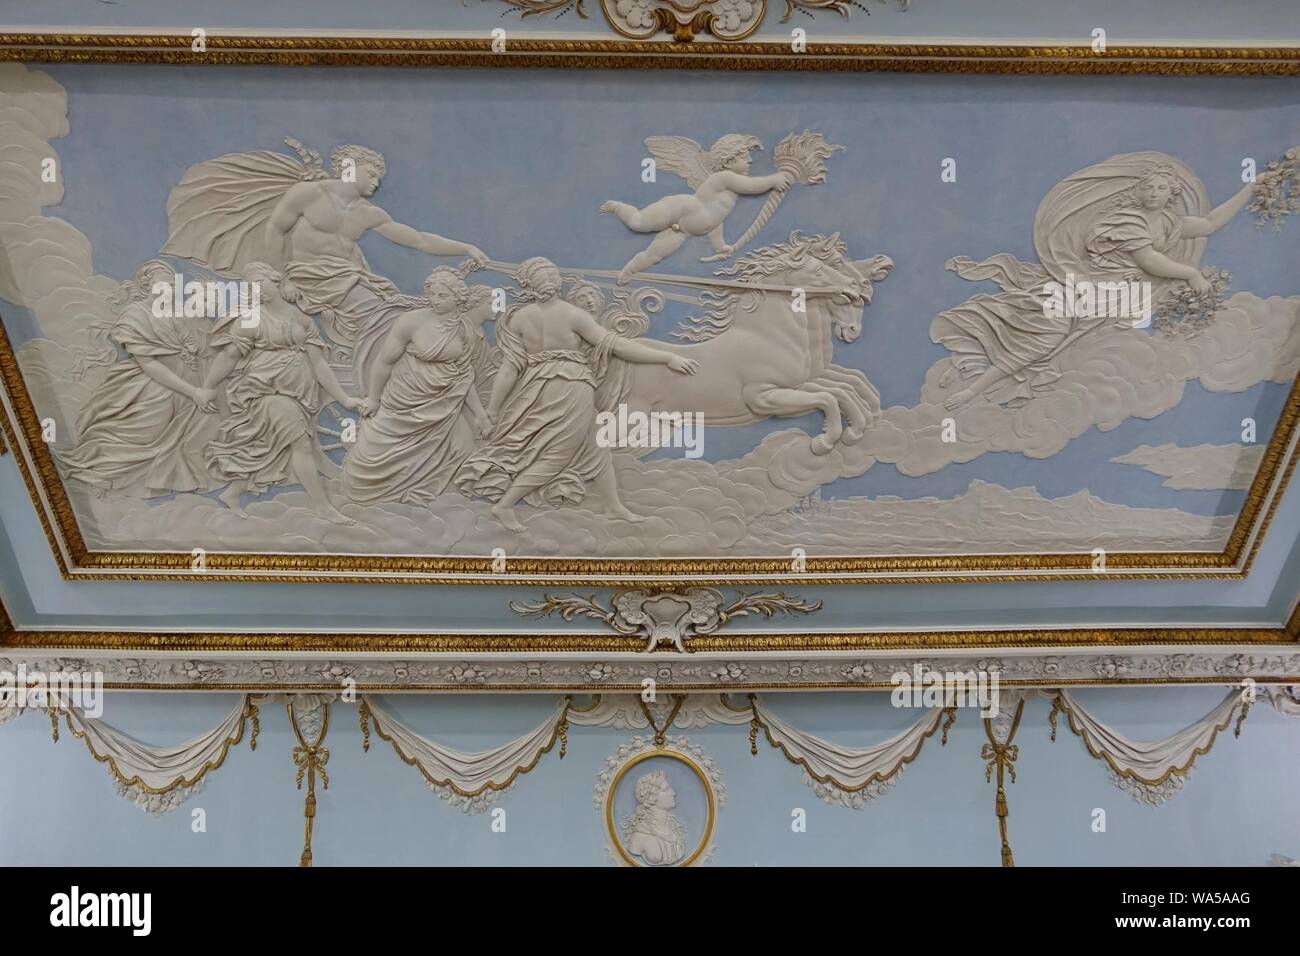 Dining Room ceiling decoration by Francesco Vassalli after Guido Reni's 'Apollo and the Hours', c. 1724-1763, plaster - Shugborough Hall - Staffordshire, England Stock Photo